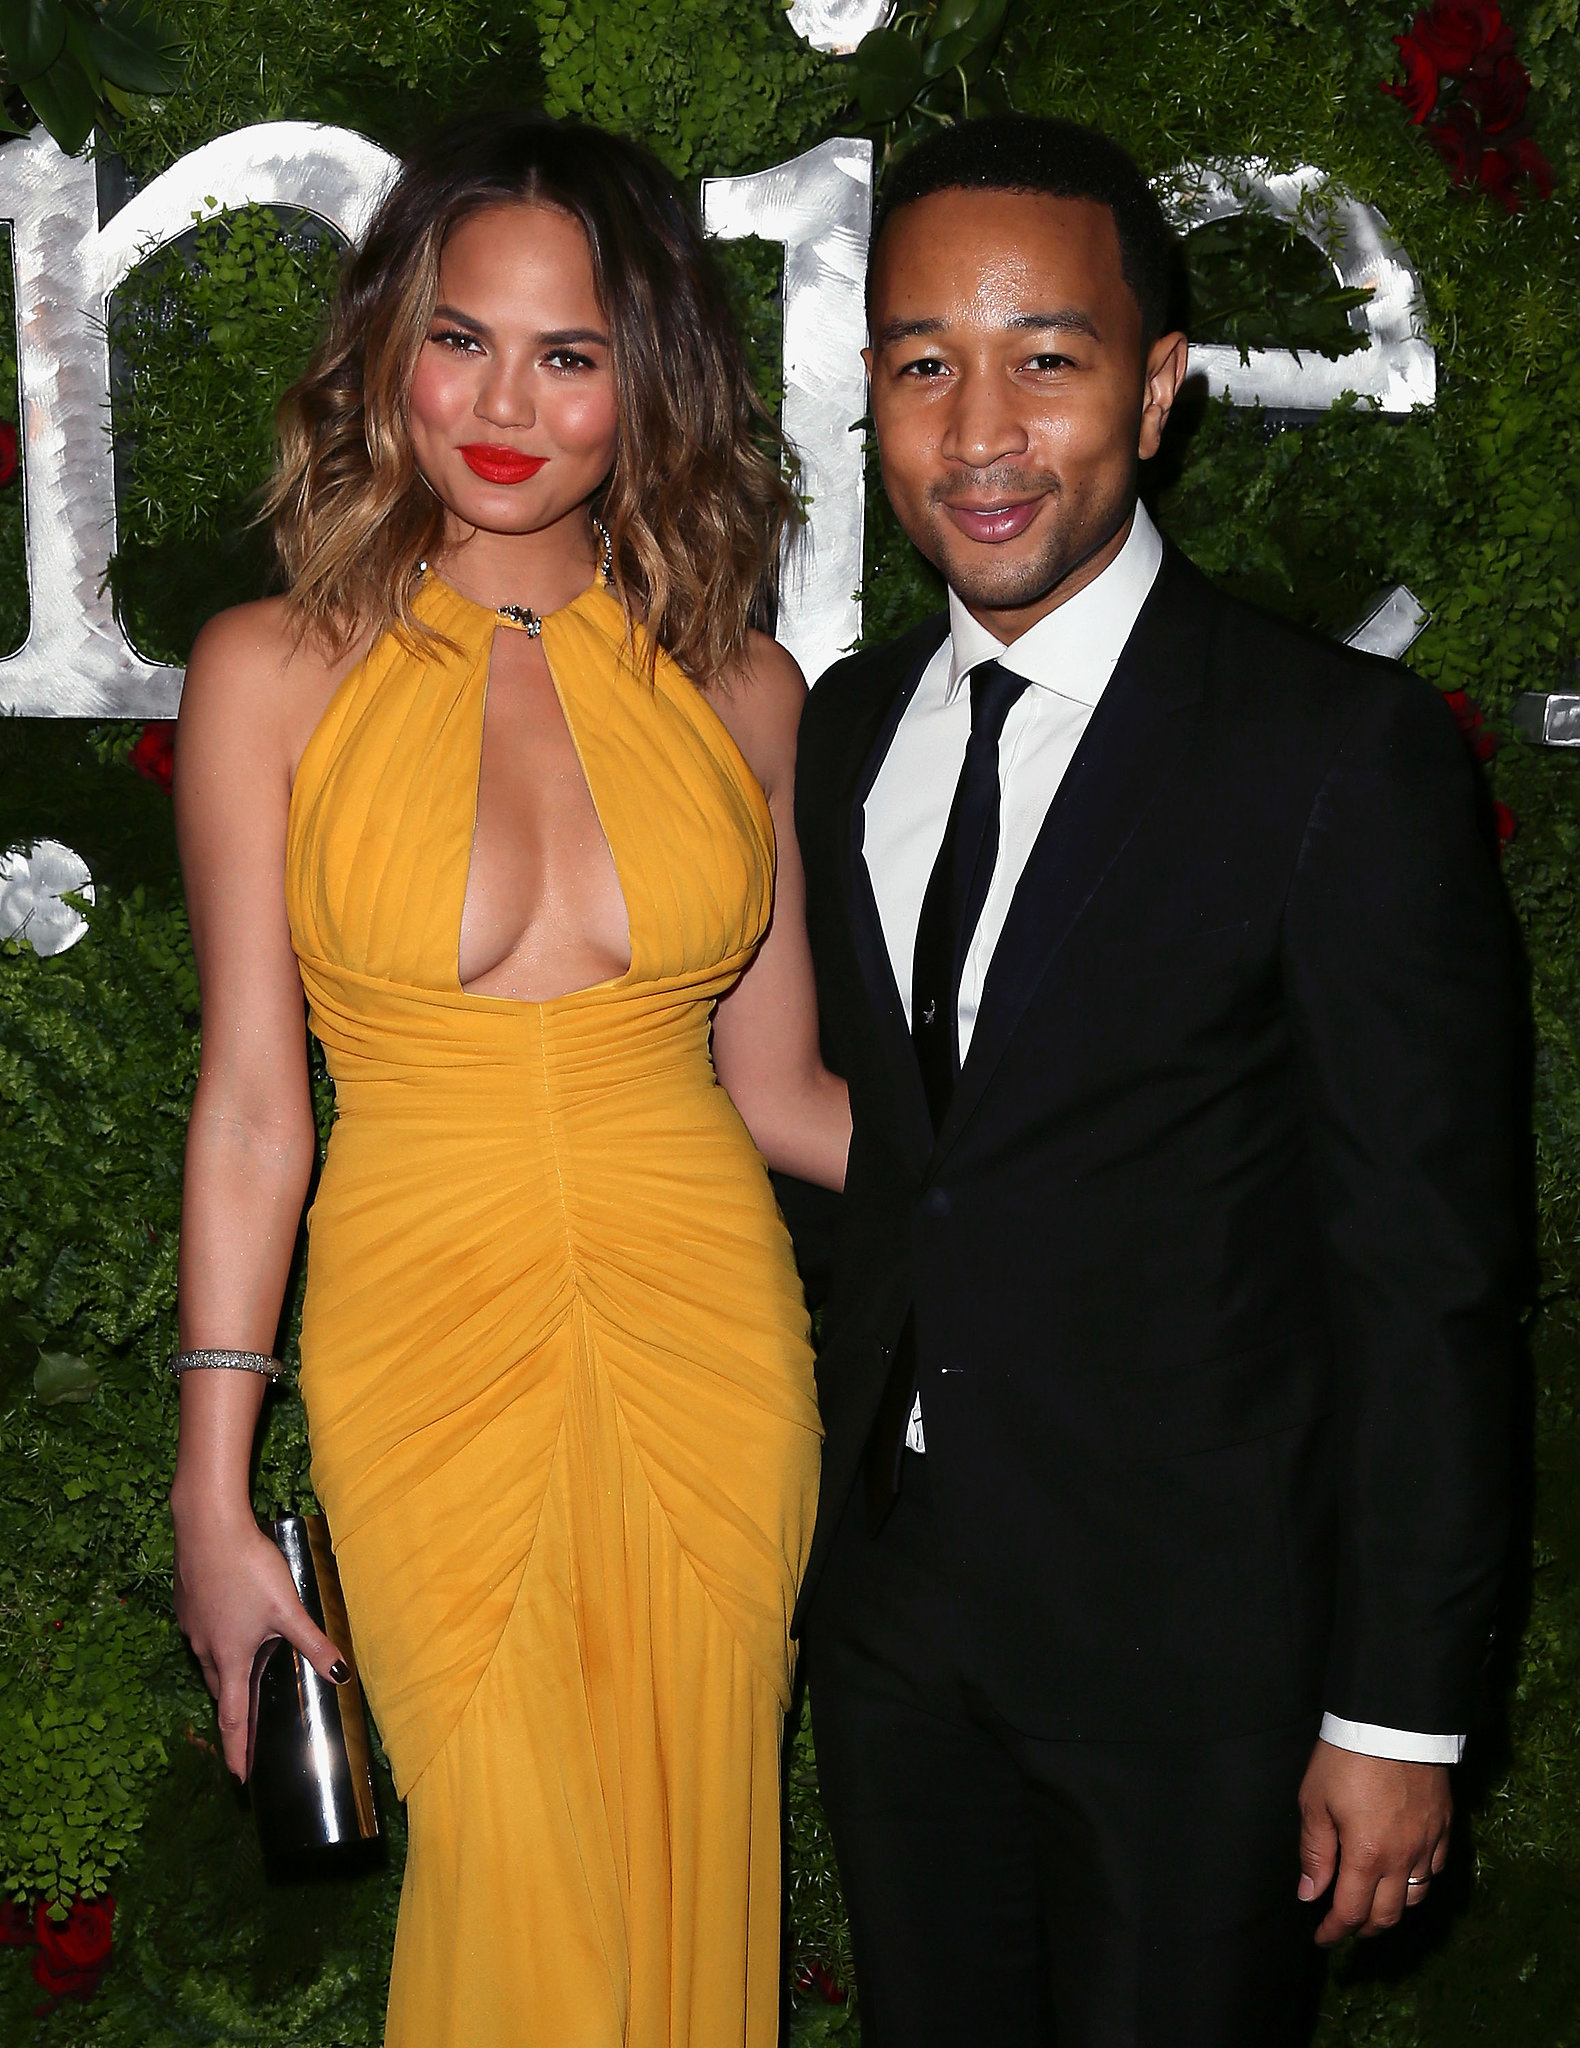 Could There Be A Reason John Legend Isn’t Returning His Calls?